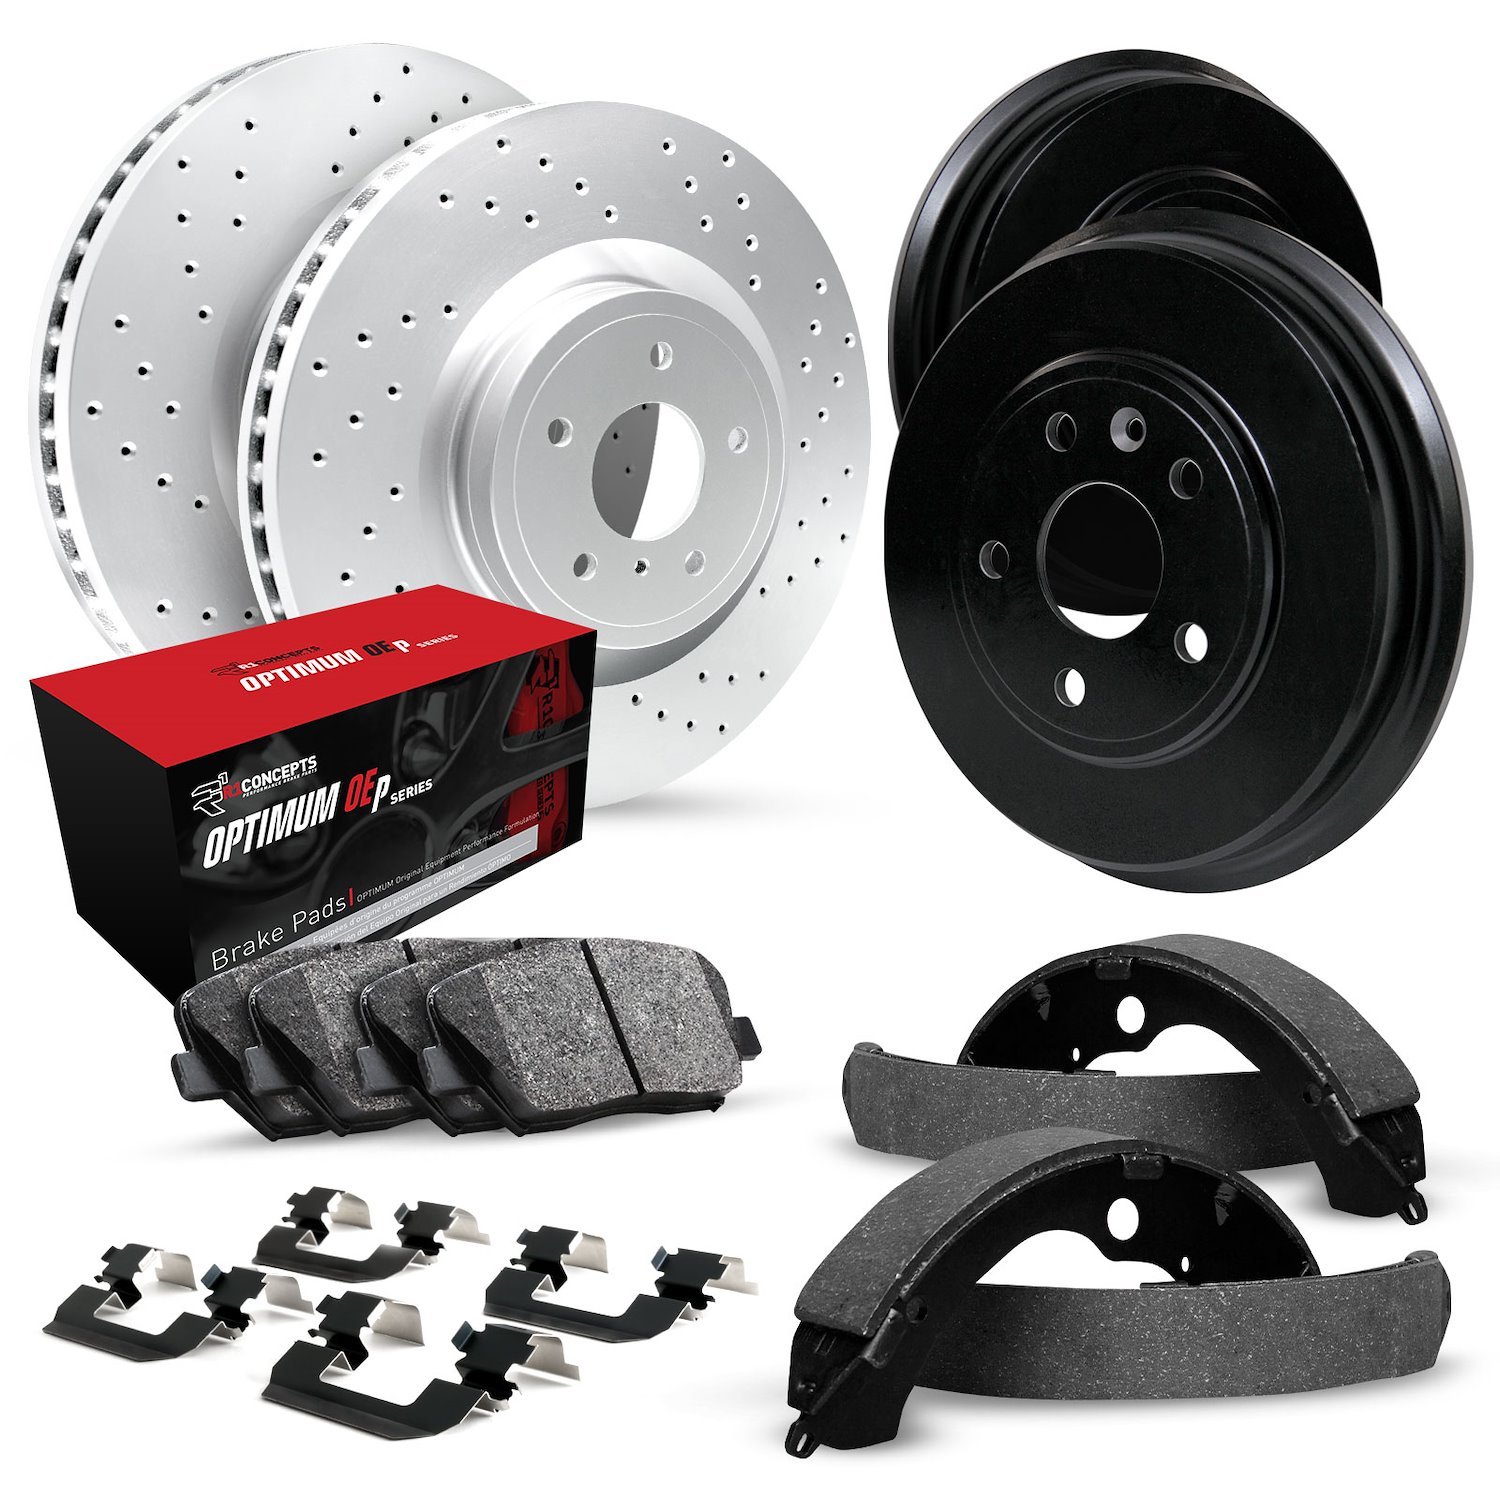 GEO-Carbon Drilled Brake Rotor & Drum Set w/Optimum OE Pads, Shoes, & Hardware, 1973-1973 GM, Position: Front & Rear